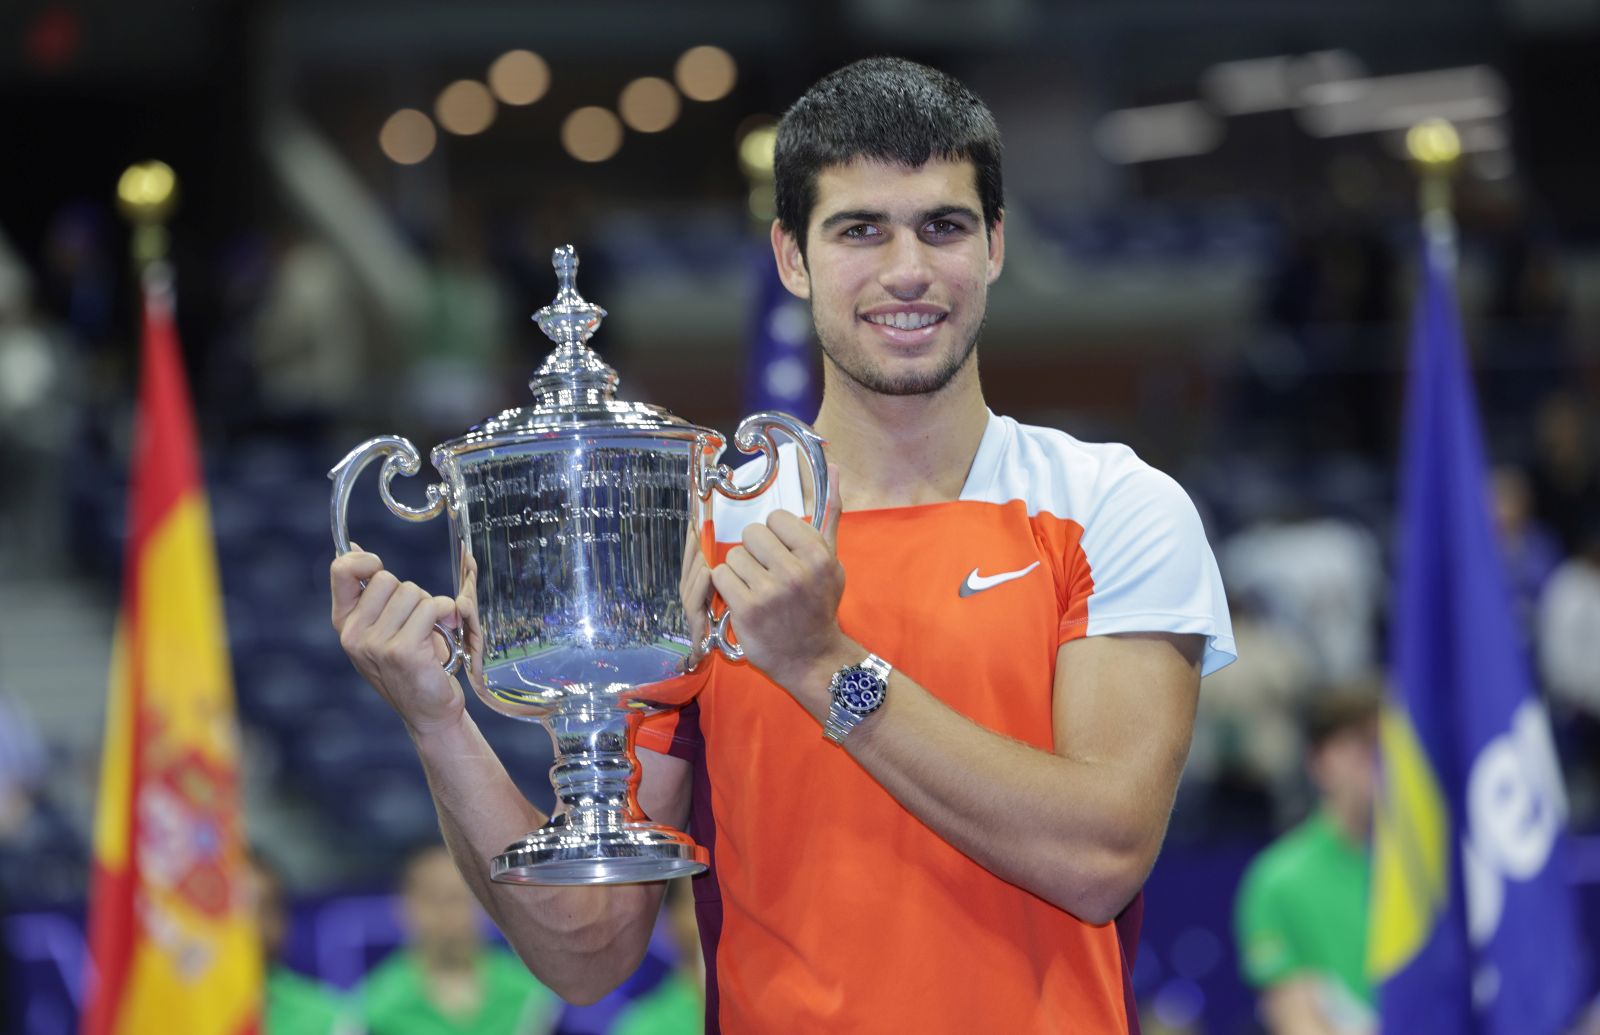 epa10179090 Carlos Alcaraz of Spain celebrates with the championship trophy after defeating Casper Ruud of Norway during the men's final match at the US Open Tennis Championships at the USTA National Tennis Center in Flushing Meadows, New York, USA, 11 September 2022. The US Open runs from 29 August through 11 September.  EPA/JUSTIN LANE